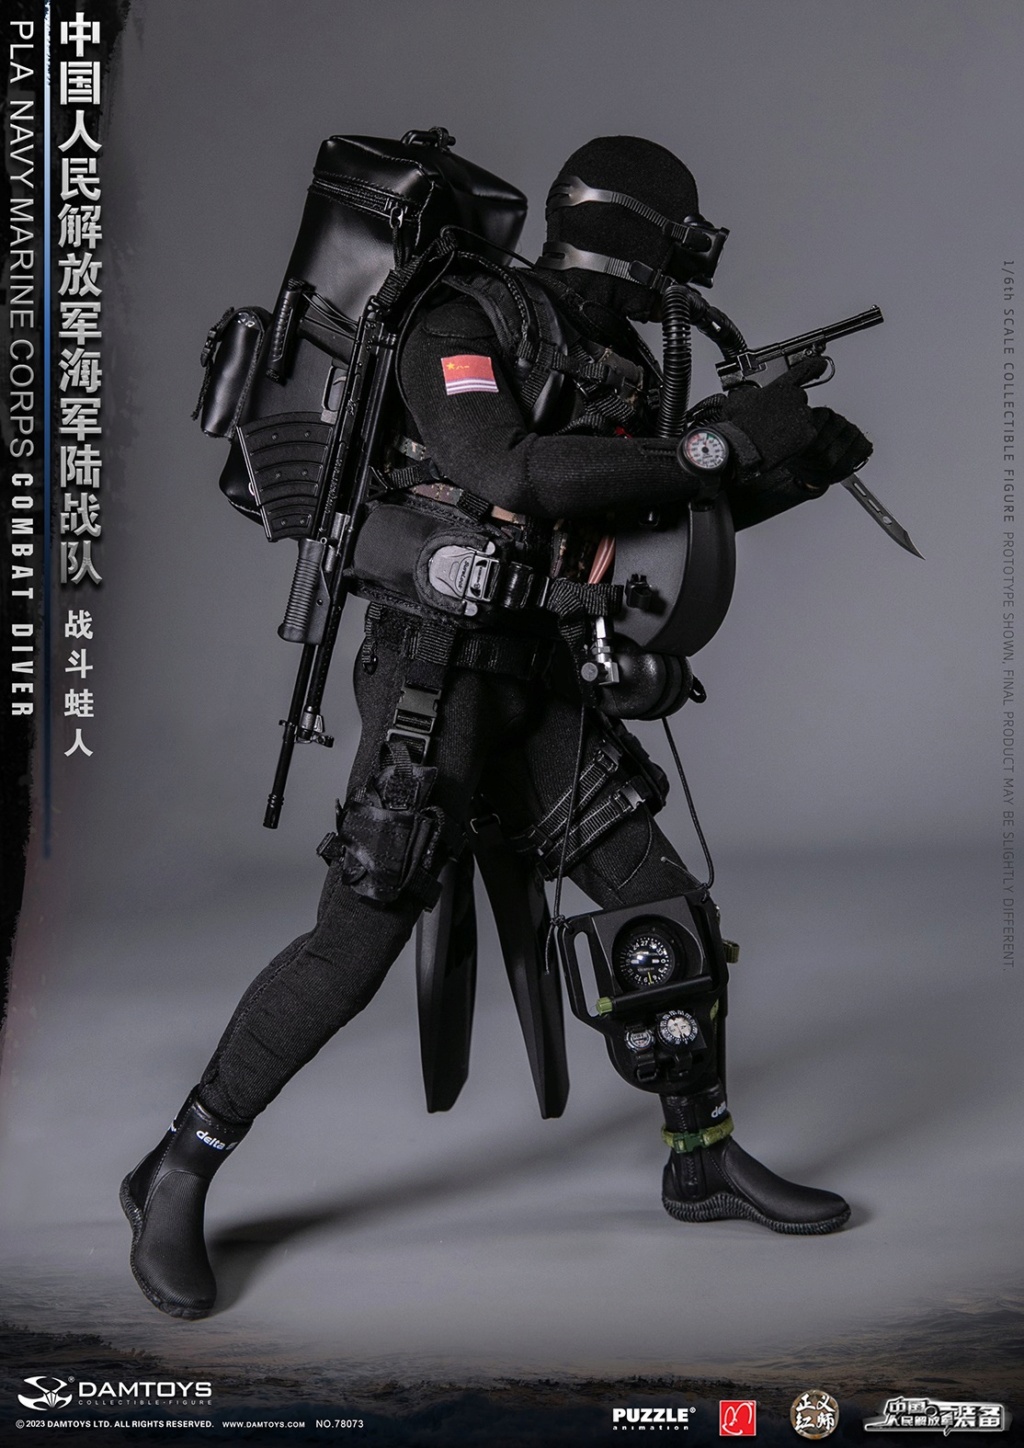 DAMToys - NEW PRODUCT: DAMToys: 1/6 Chinese People's Liberation Army Marine Corps - Combat Frogman Action Figure #78073 14301311